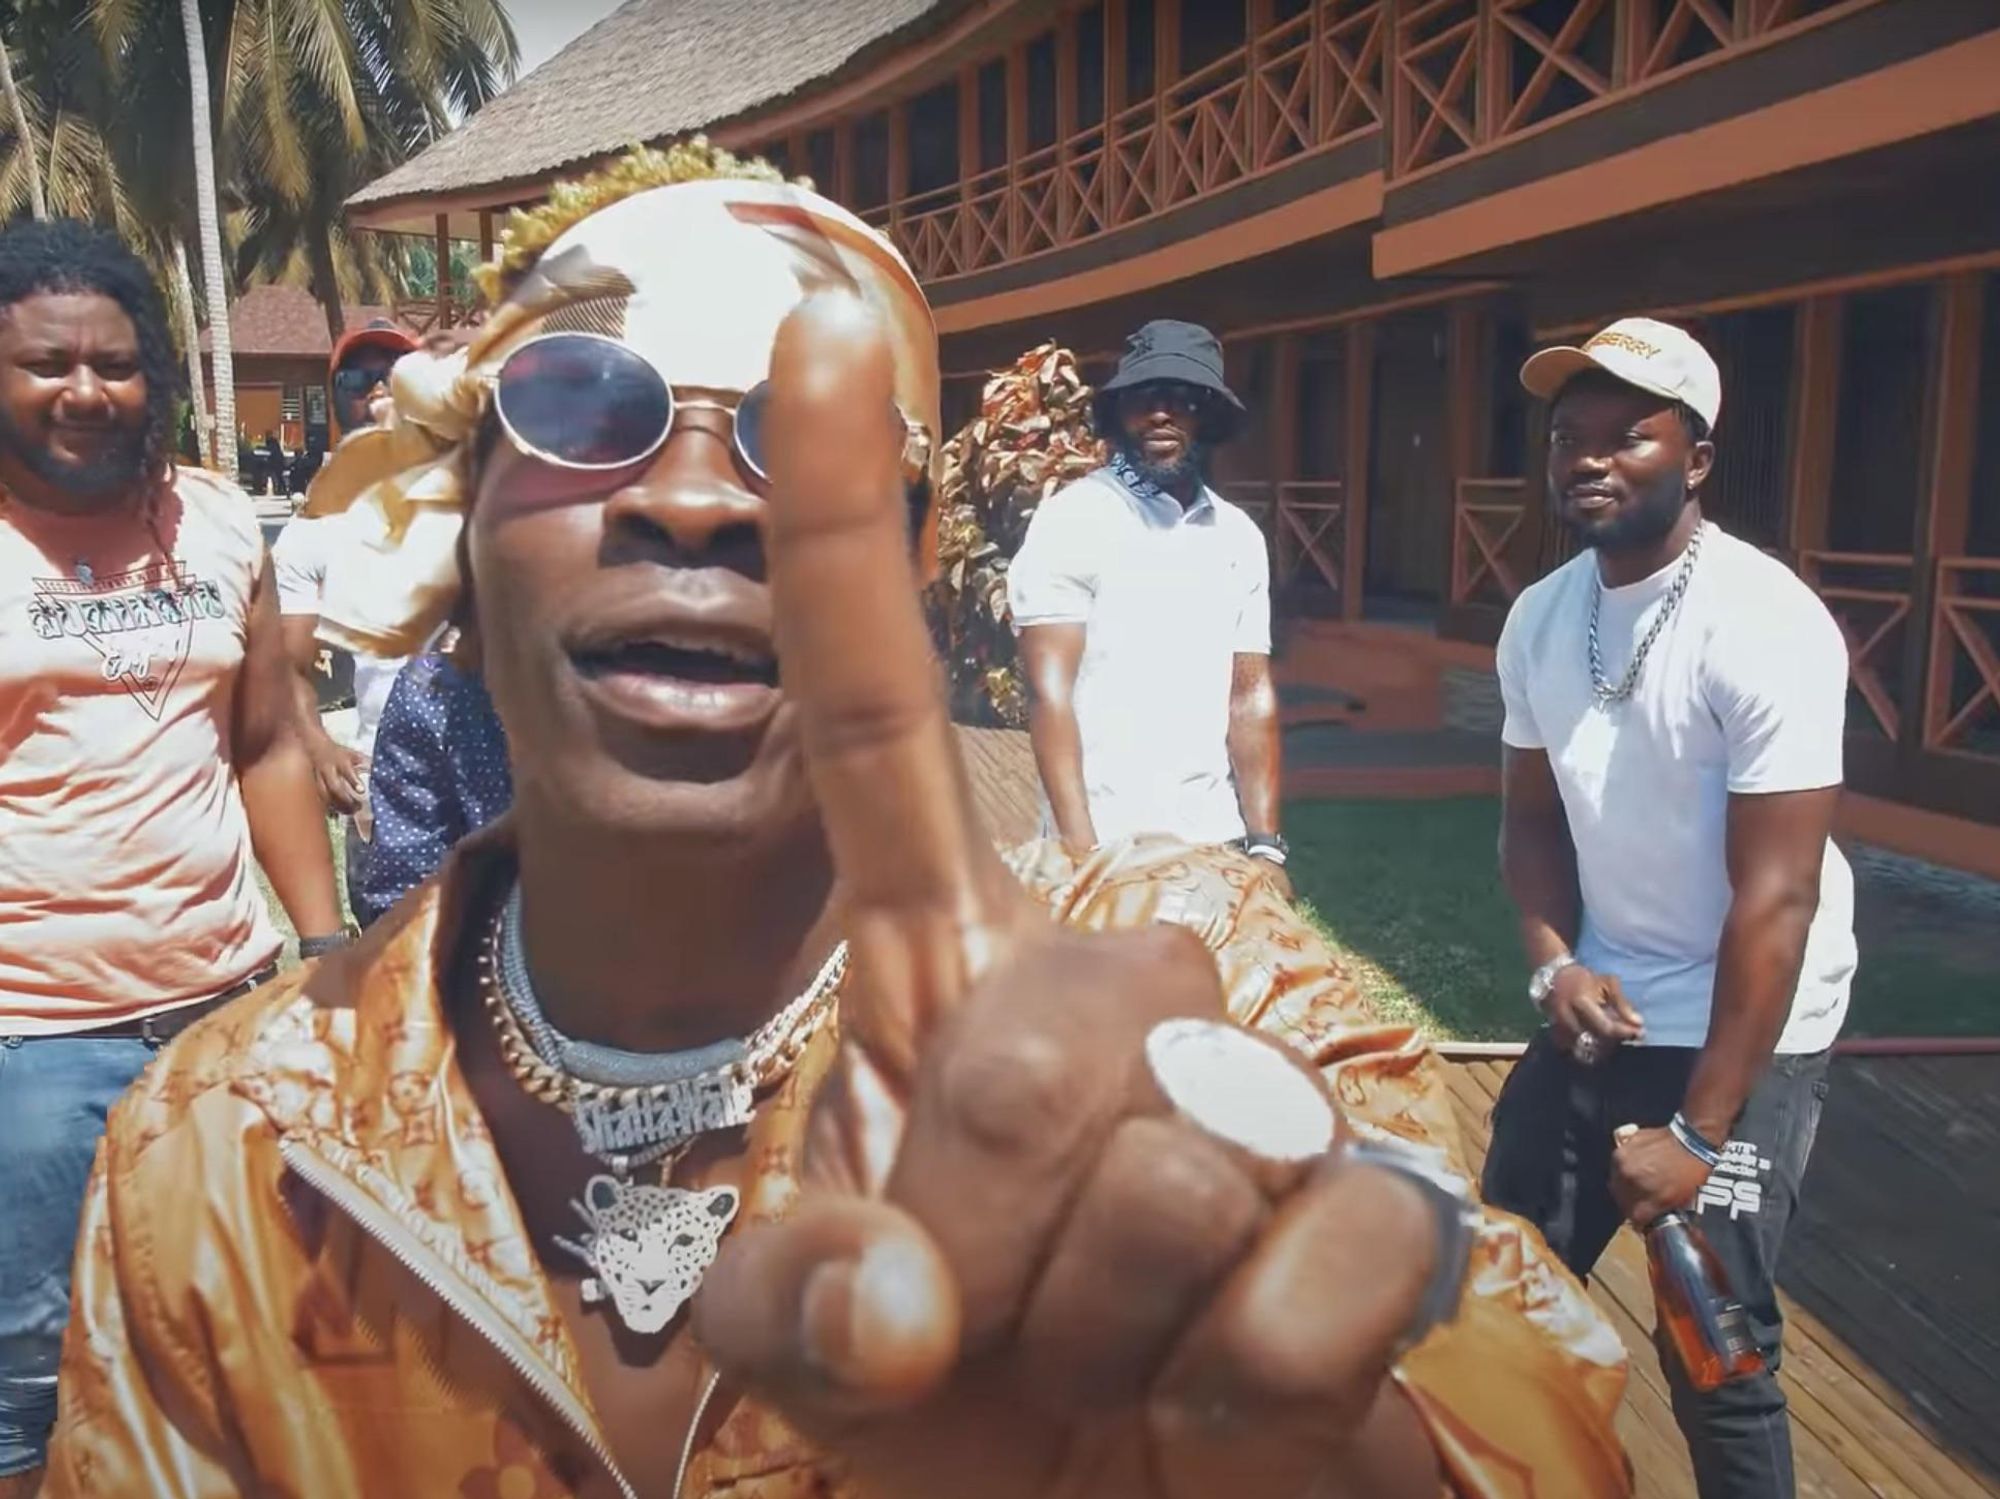 ​Shatta Wale lifts his index finger up in a screen grab from his "1 Don" music video.